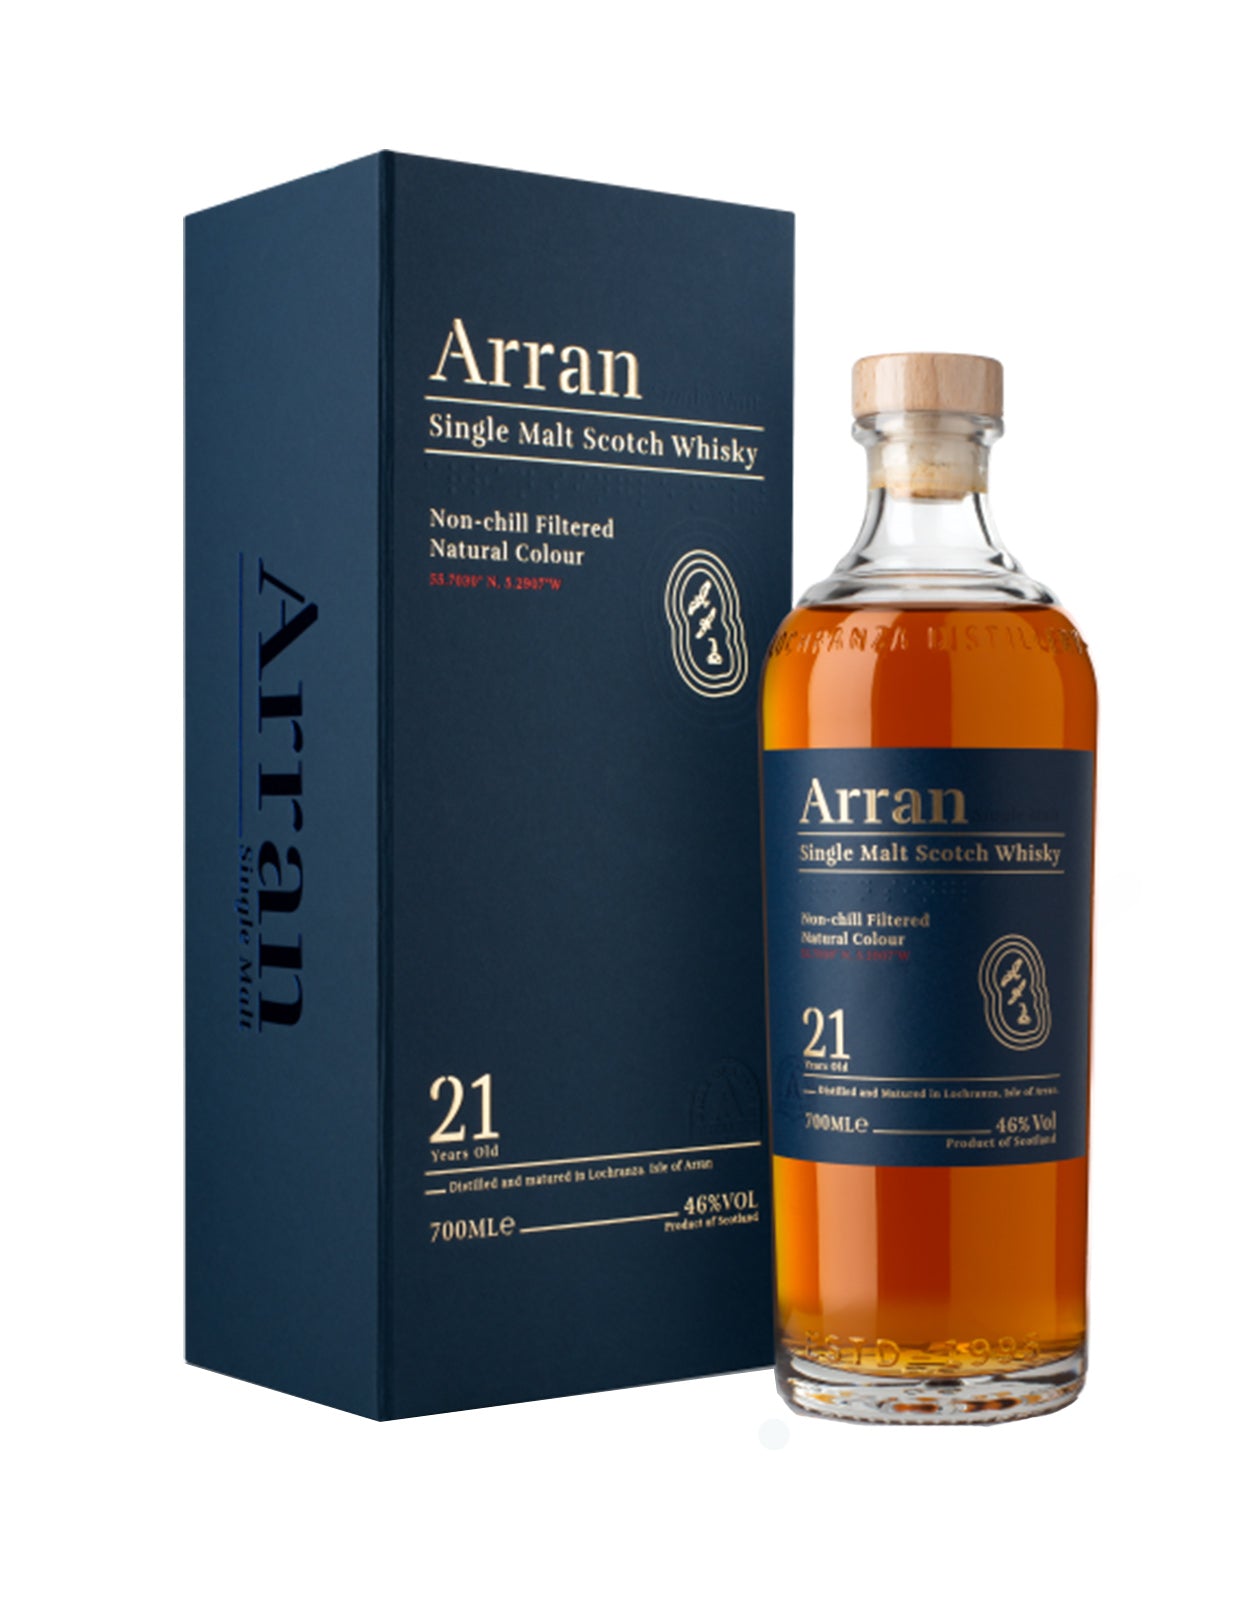 The Arran 21 Year Old